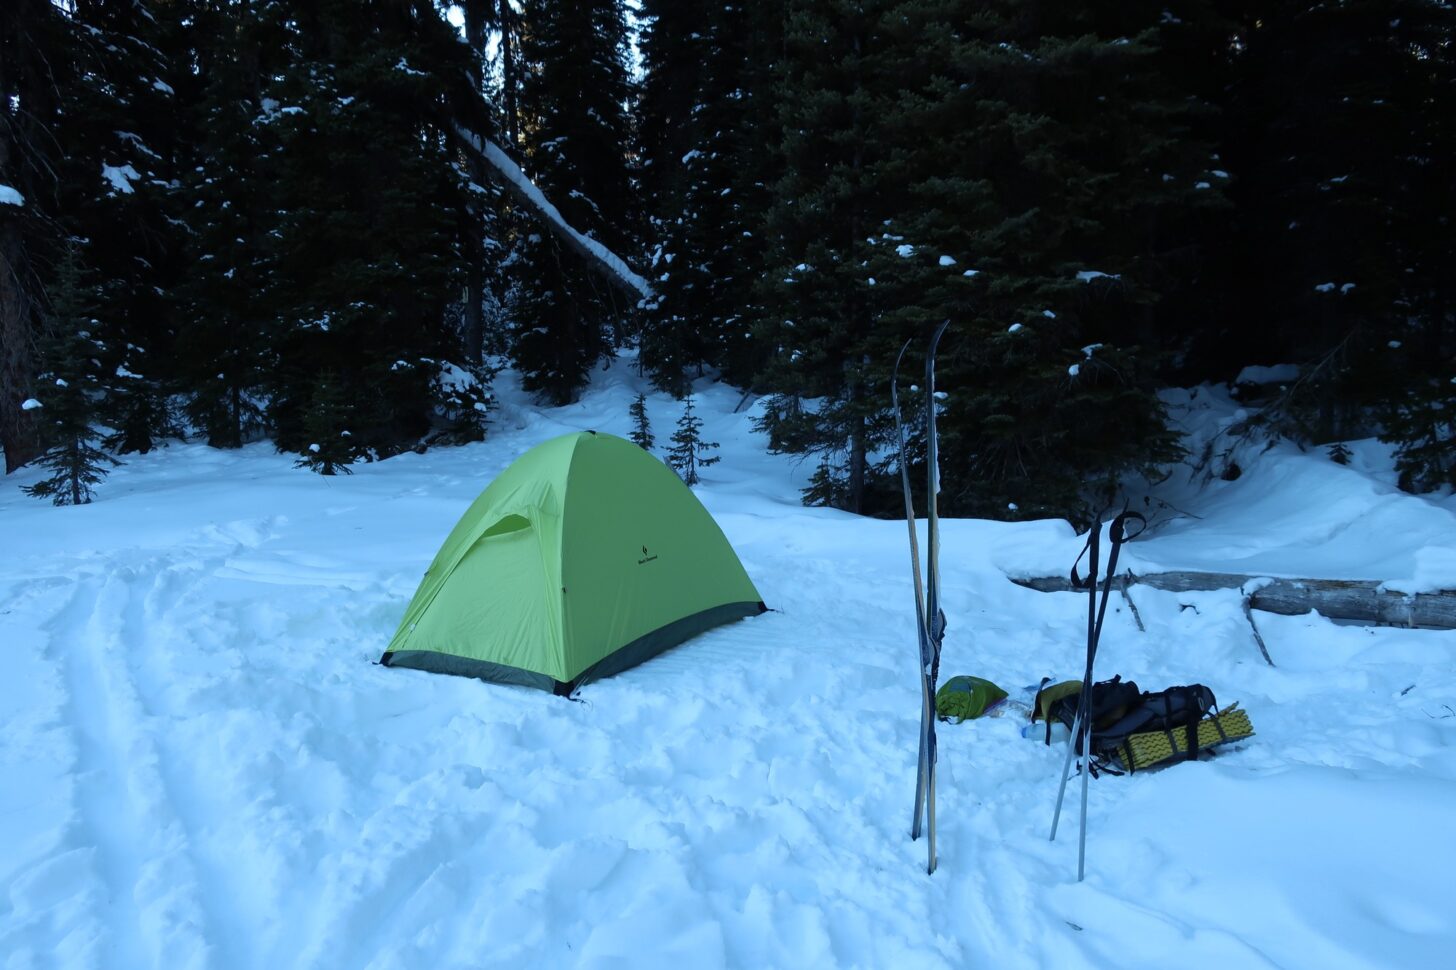 Photo shows a tent sent up on snow with skis and ski poles nearby.